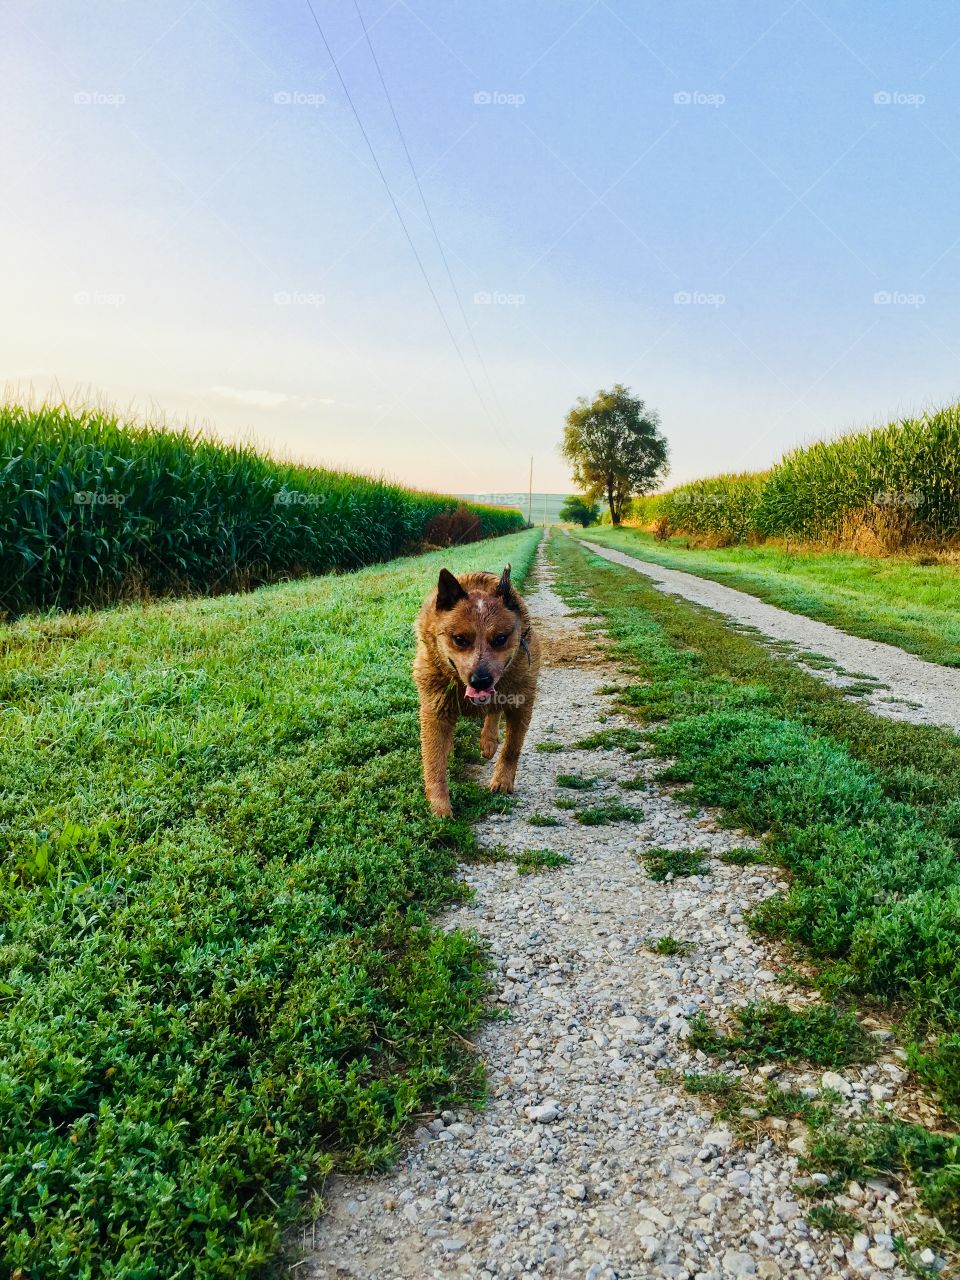 Low-level view of an Australian Cattle Dog / Red Heeler walking down a country lane with lush grass and cornfields on either side